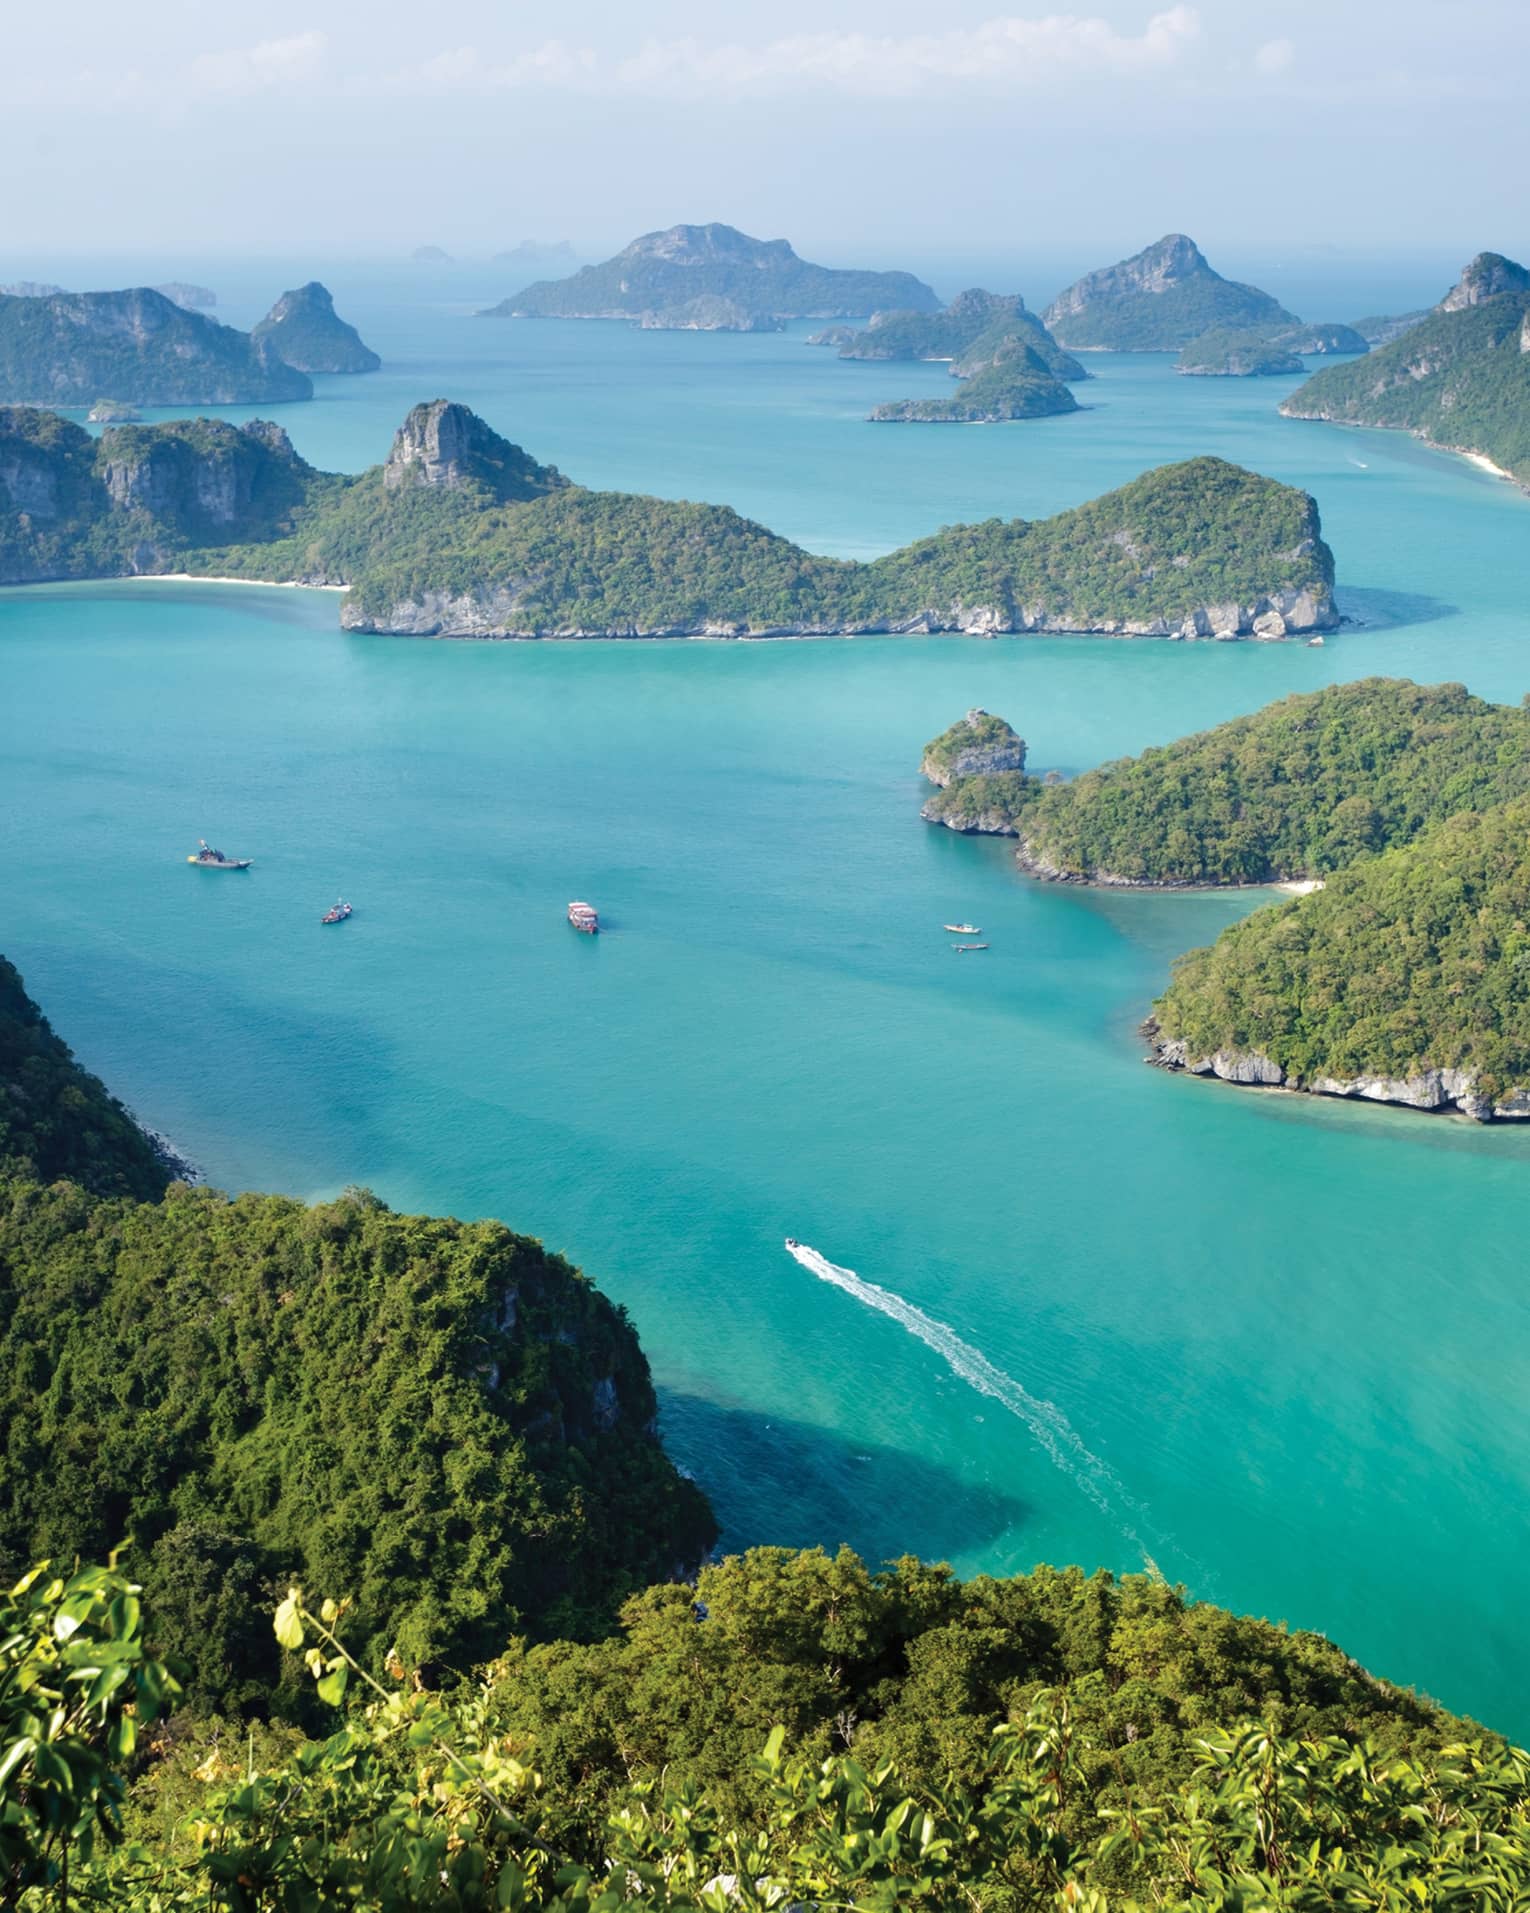 Aerial view of a dozen lush, forested, hilly islands of different sizes surrounded by calm turquoise water dotted with boats.